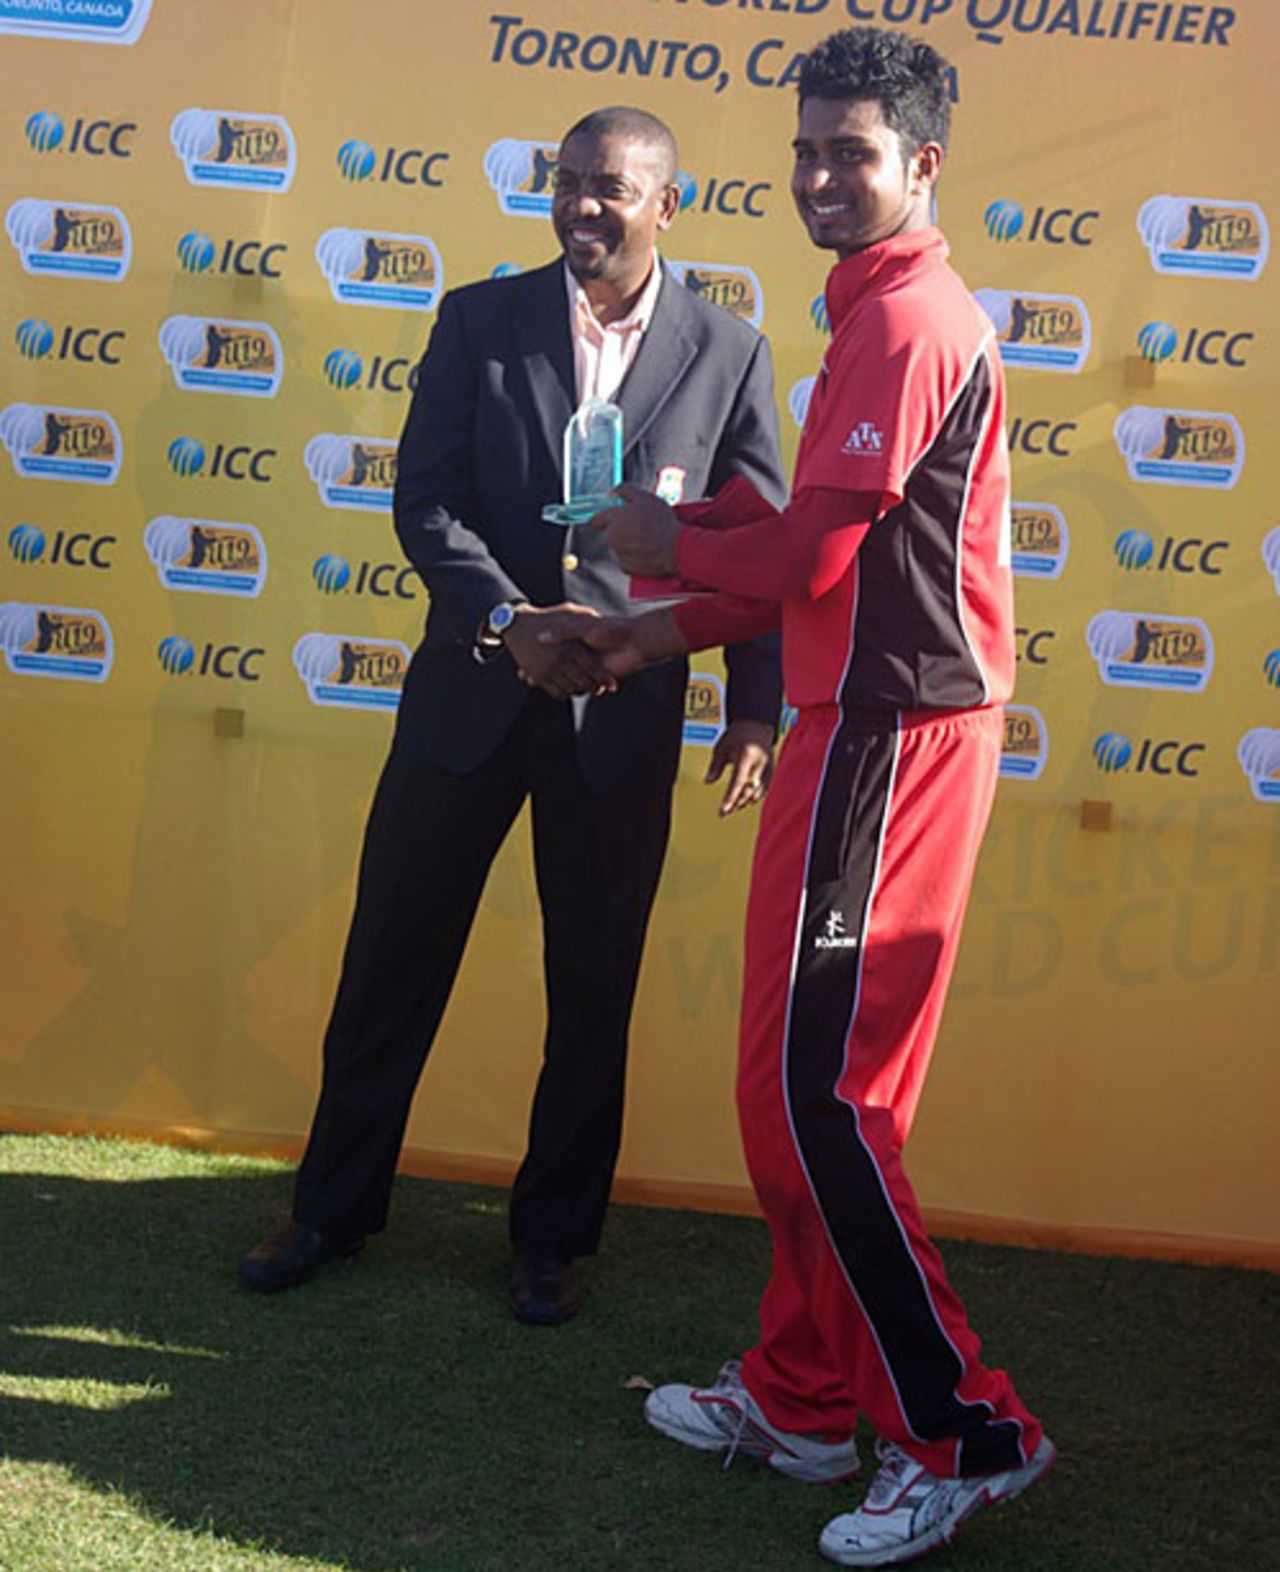 Ruvindu Gunasekera was the Man of the Match for his unbeaten 57, Canada v Afghanistan, ICC Under-19 Cricket World Cup Qualifier, Toronto, September 13, 2009